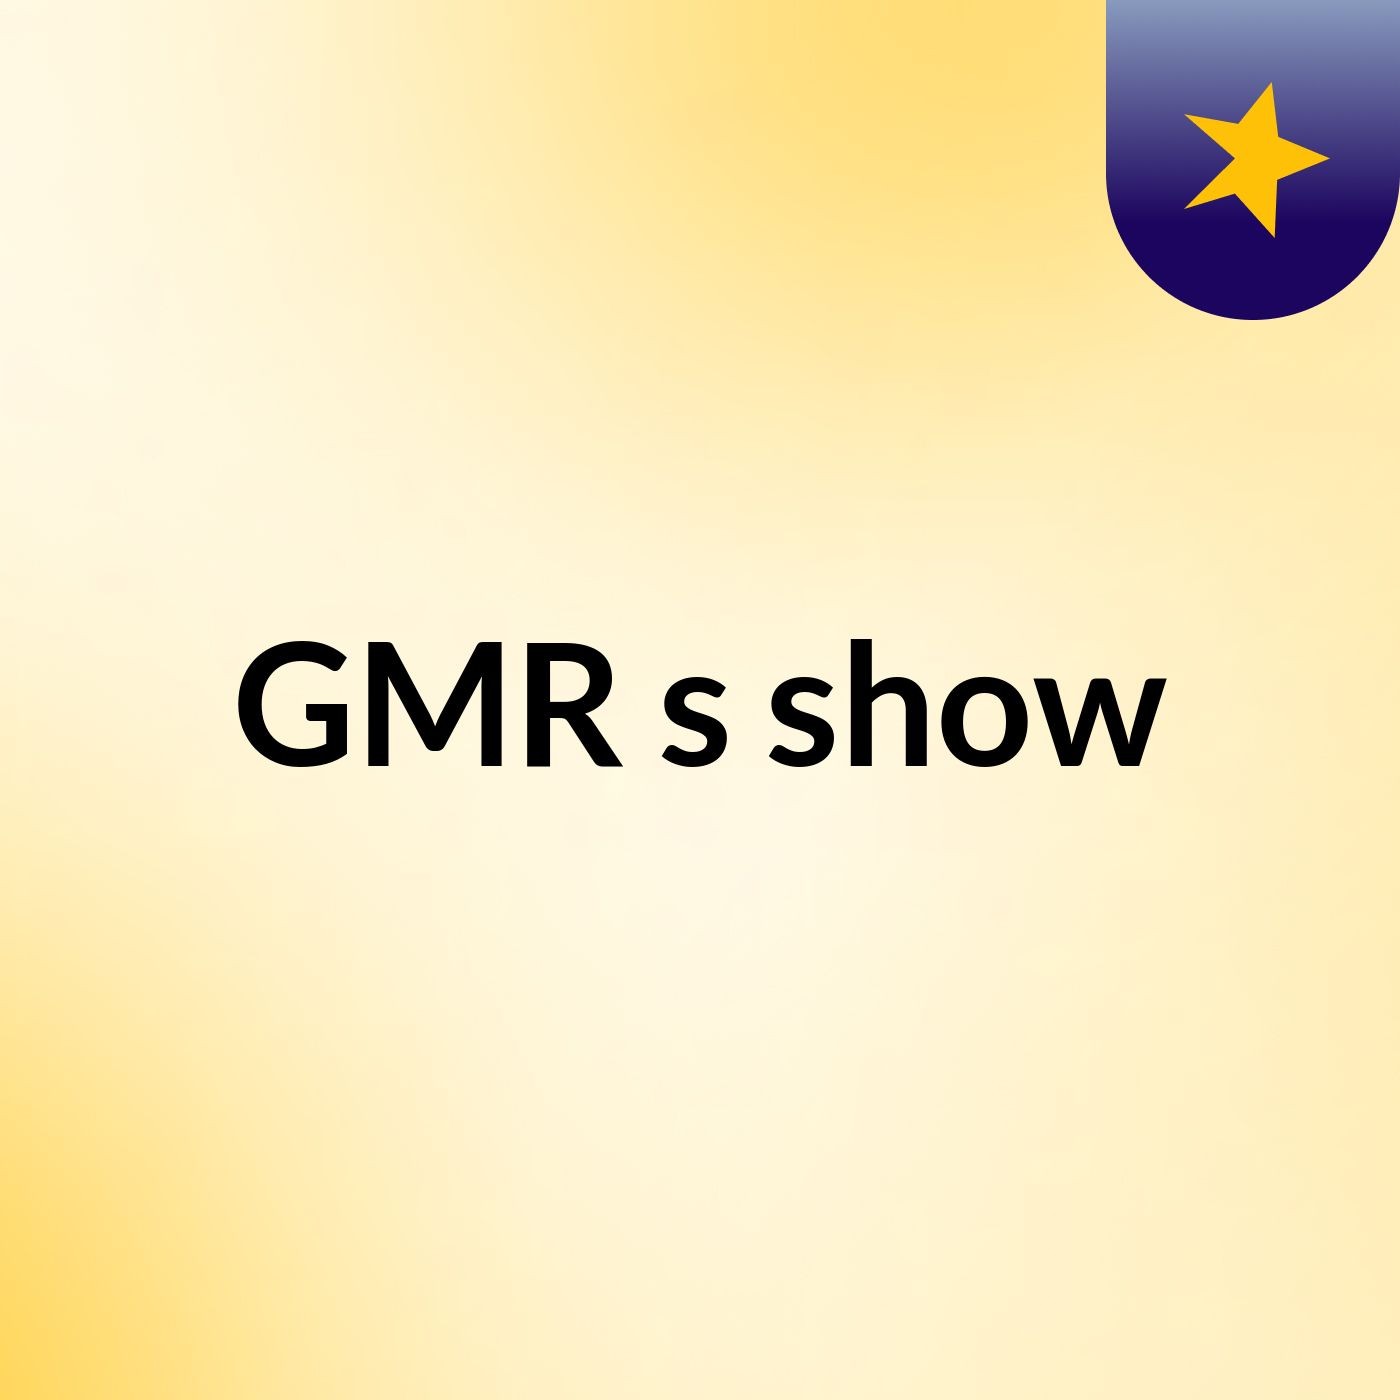 GMR's show